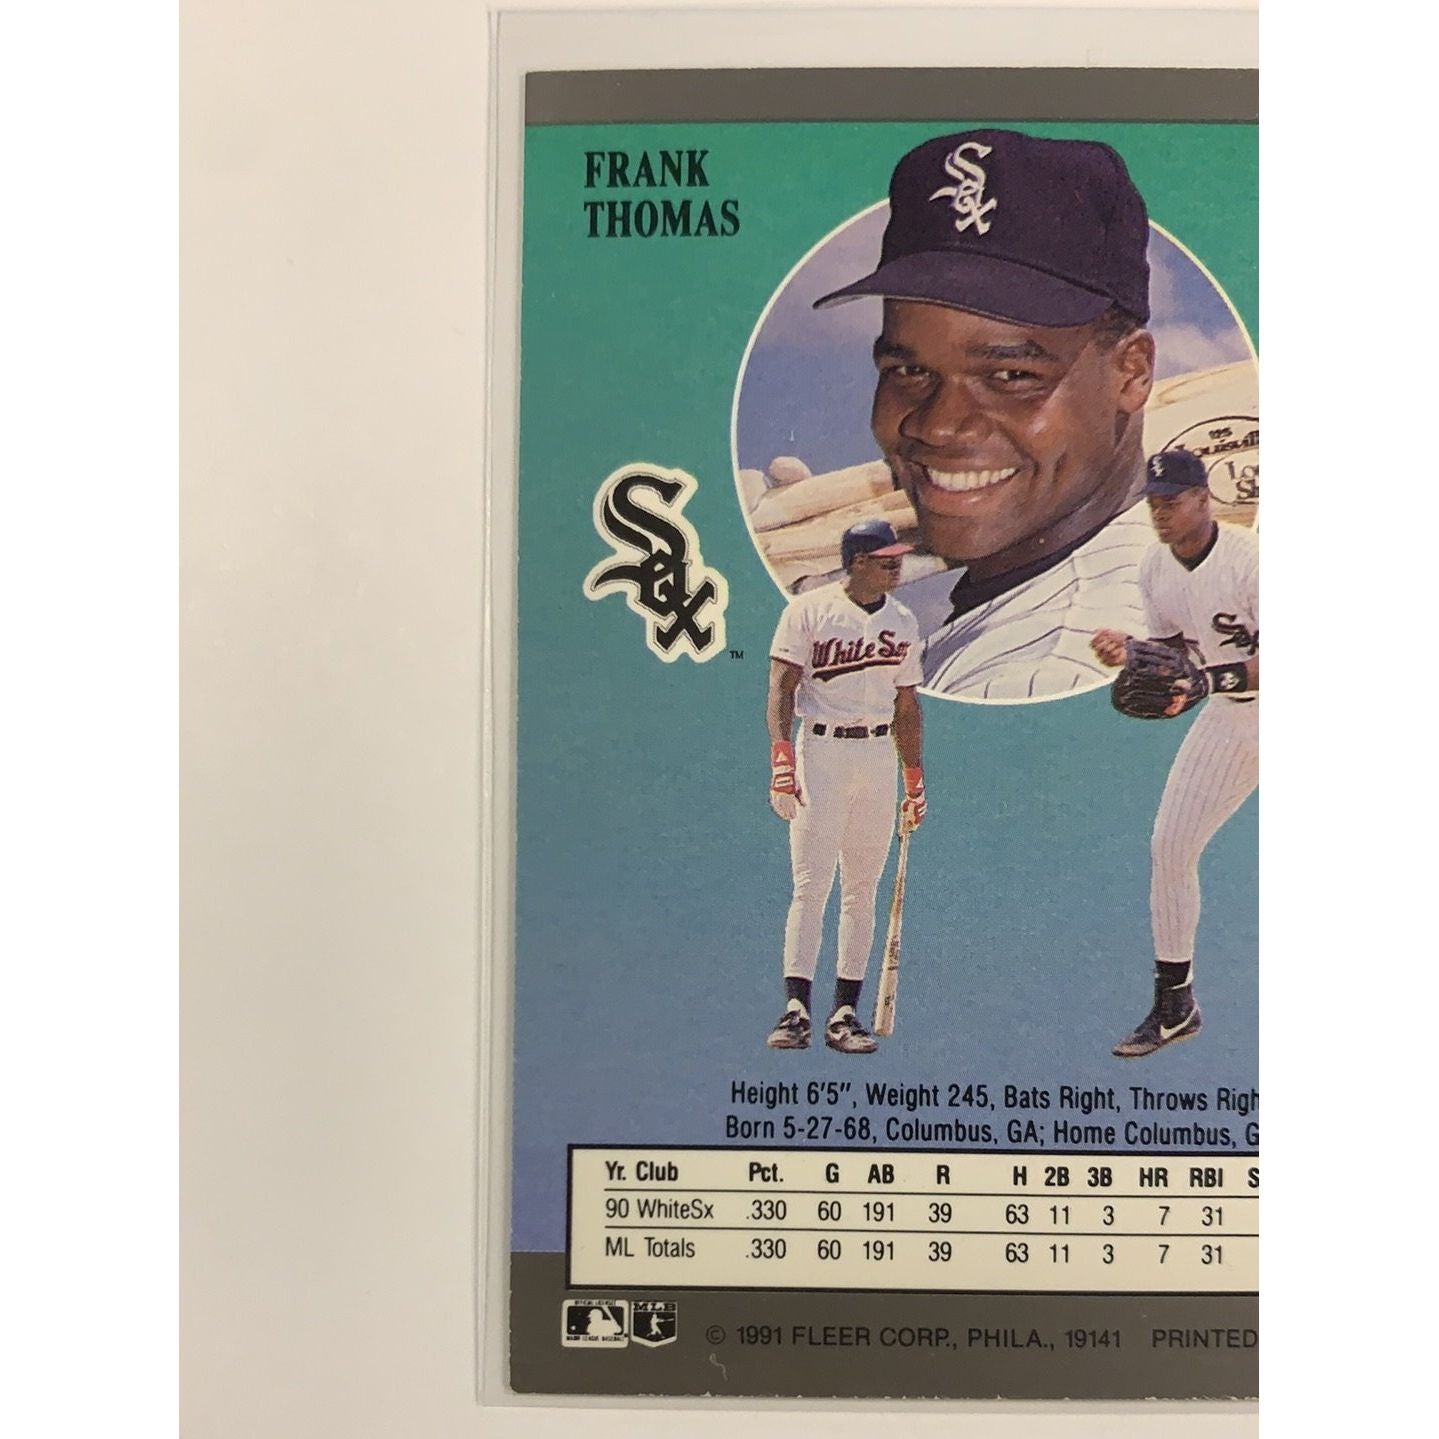  1991 Fleer Ultra Frank Thomas 2nd Year Card  Local Legends Cards & Collectibles